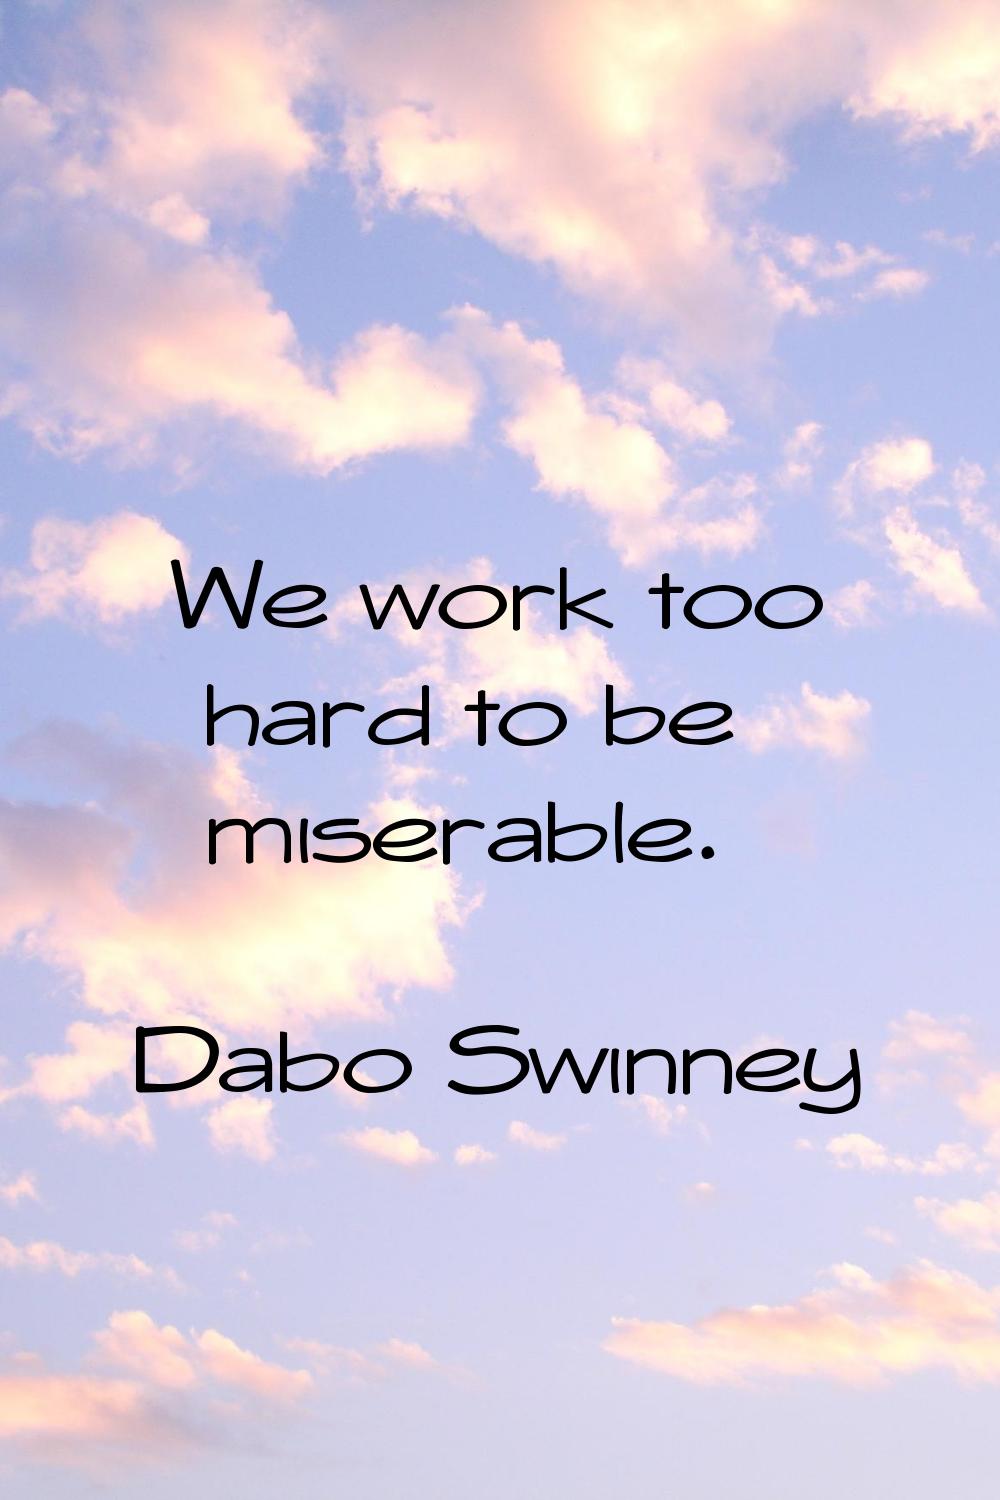 We work too hard to be miserable.